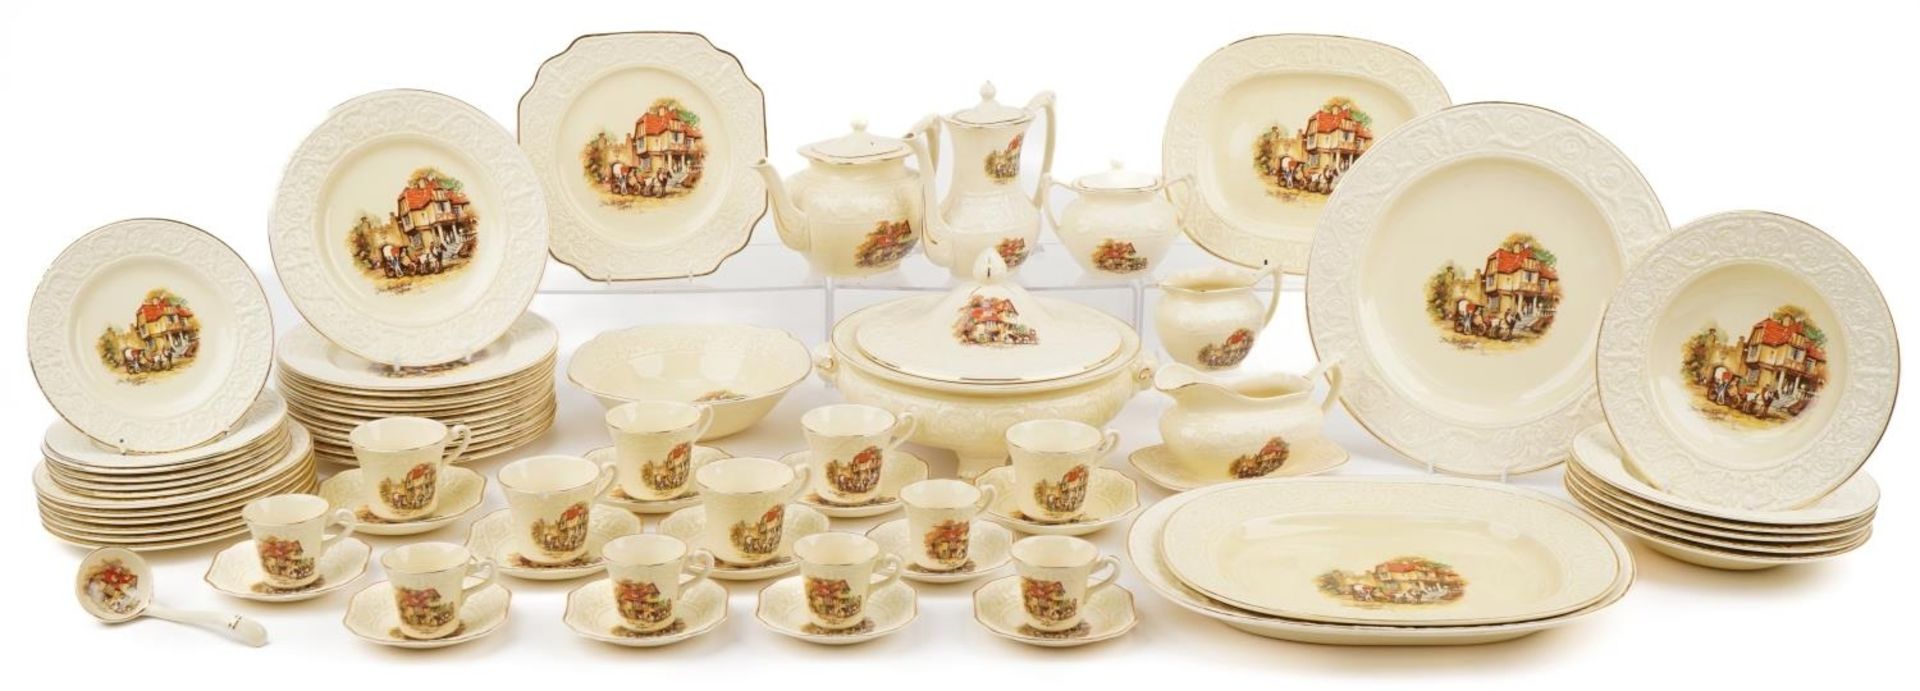 Crown Devon Coaching Days dinner and teaware including lidded tureens, graduated set of three meat